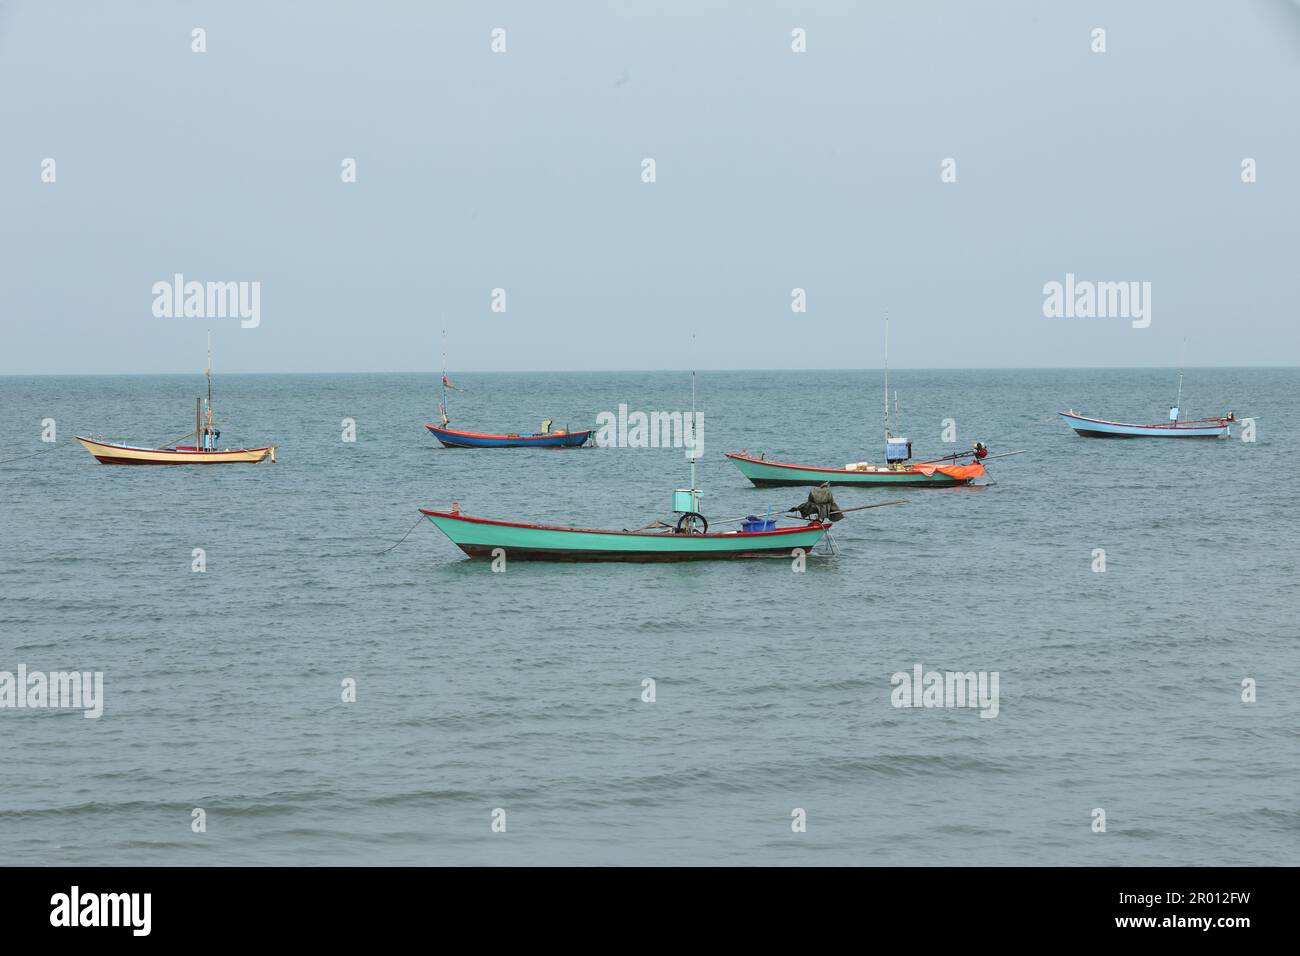 Row of fishing boat floating on the sea. Stock Photo